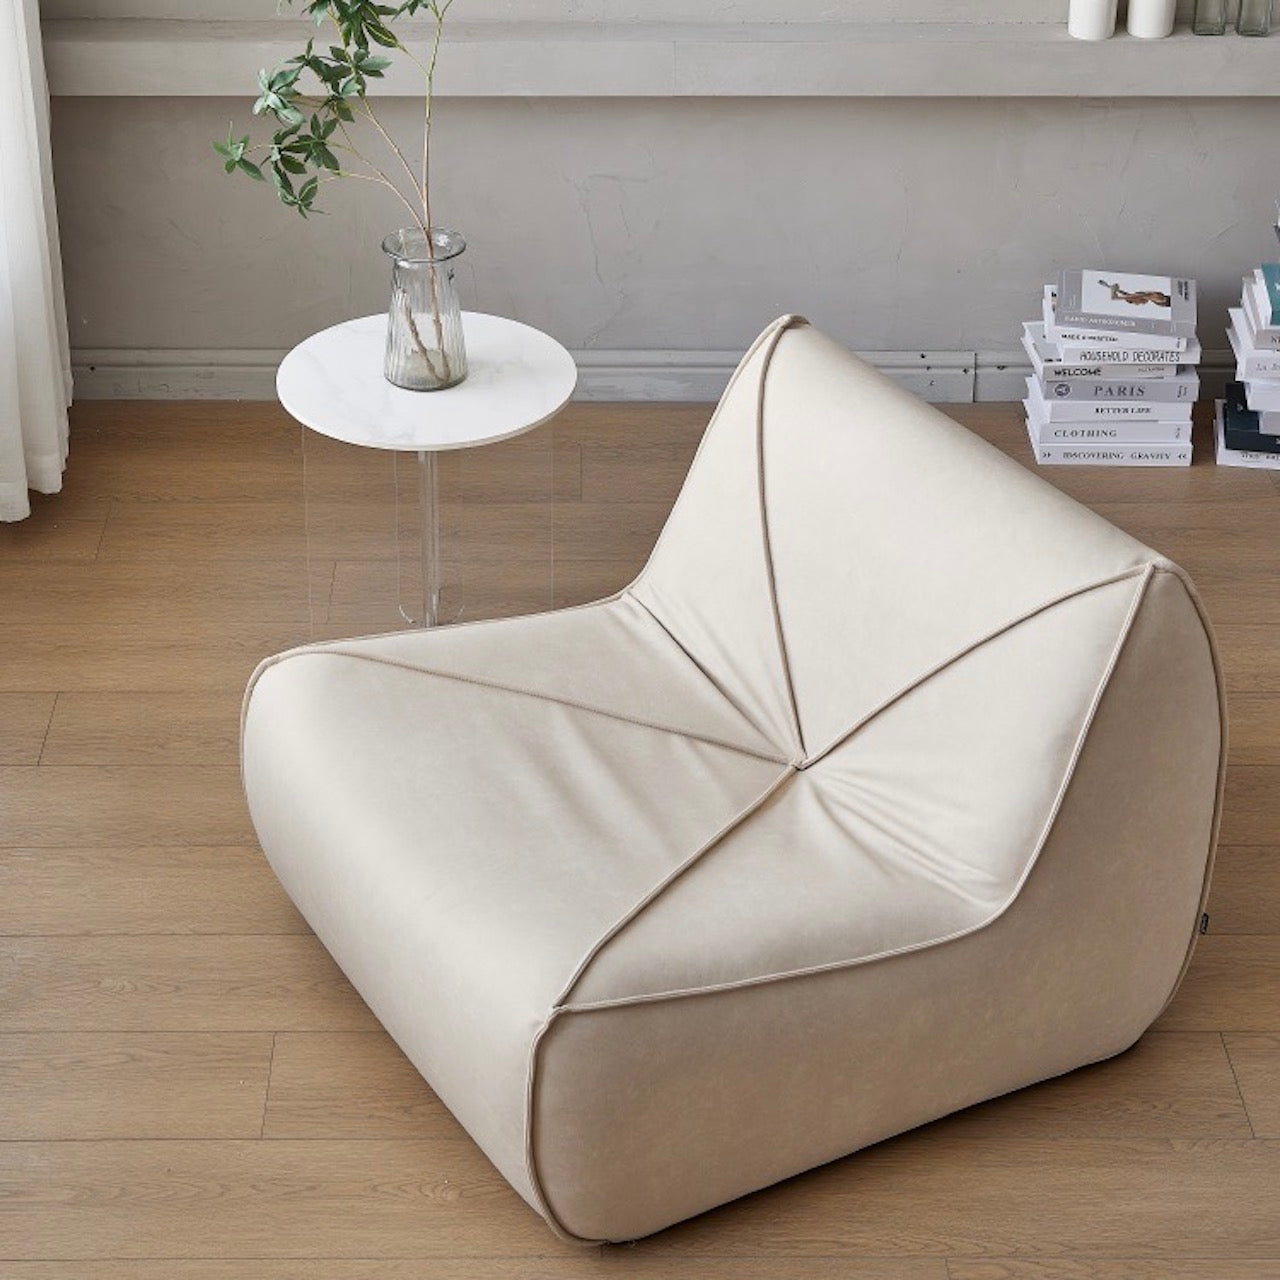 Elegant White Scratch-Resistant Caterpillar Lounge Chair in Ultrafine Leather